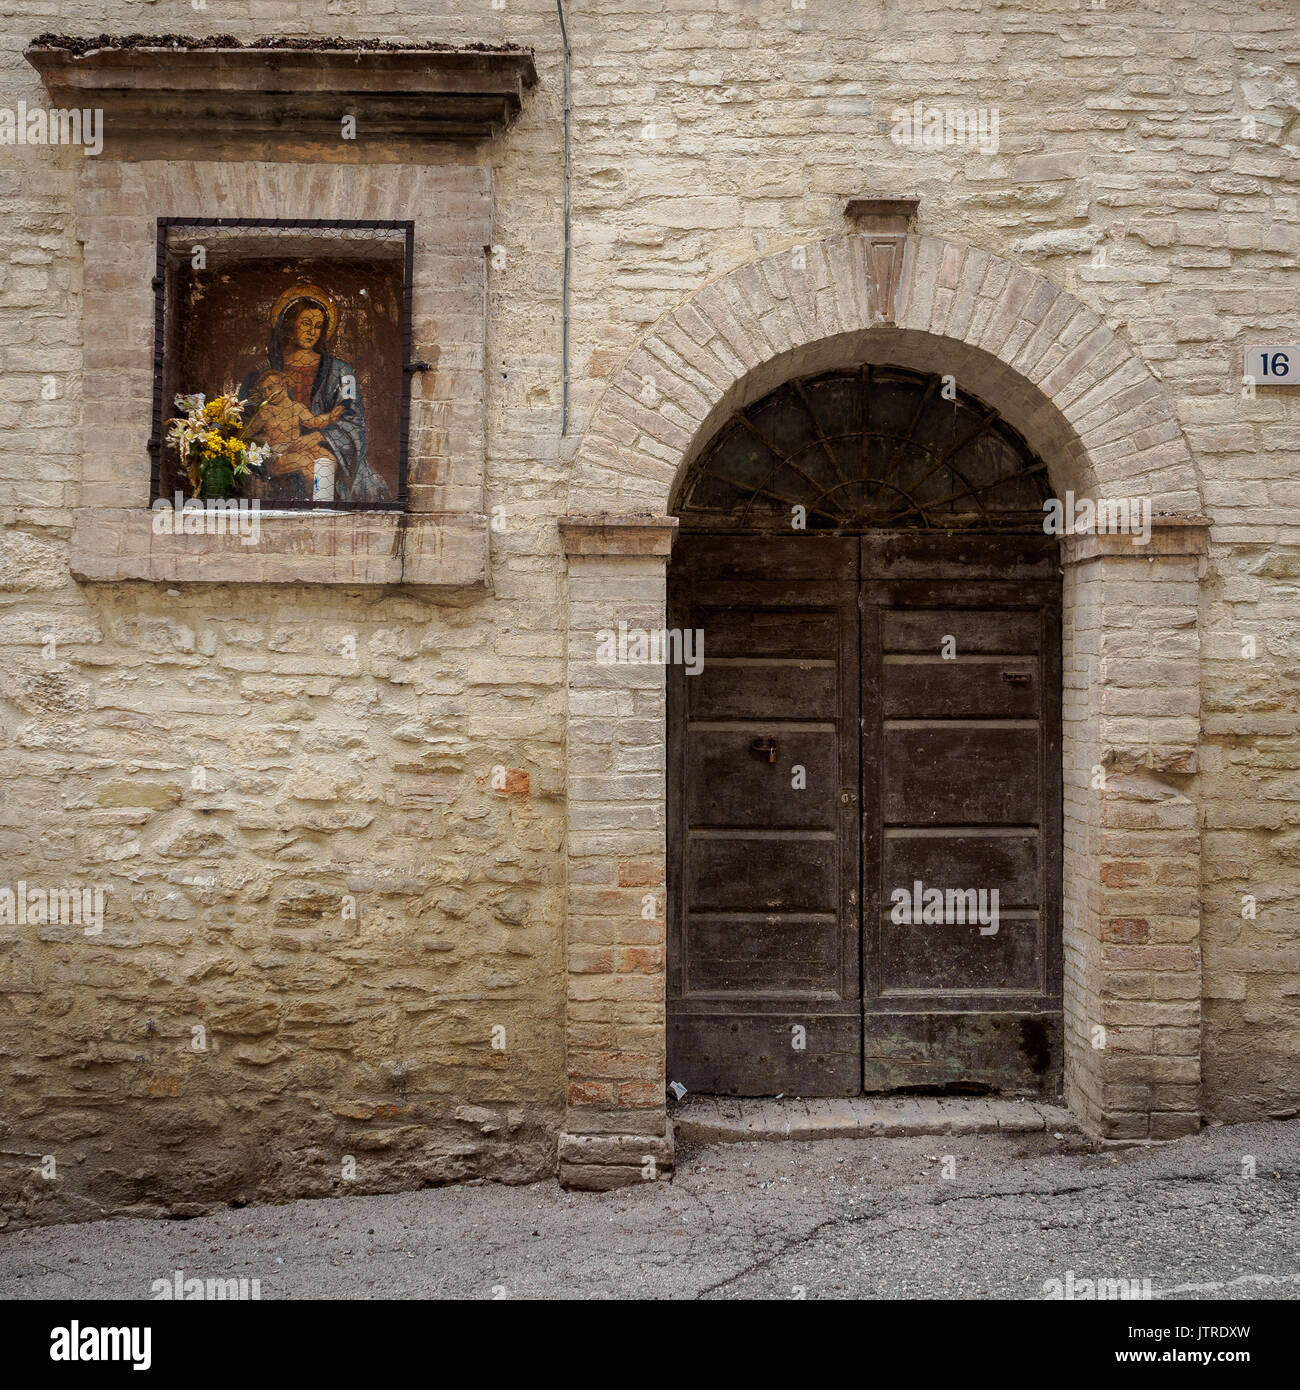 Wall painting ('edicola sacra' in the Italian language) of the Holy Virgin on a building wall in an alley of Bevagna (Italy). March 2017. Stock Photo